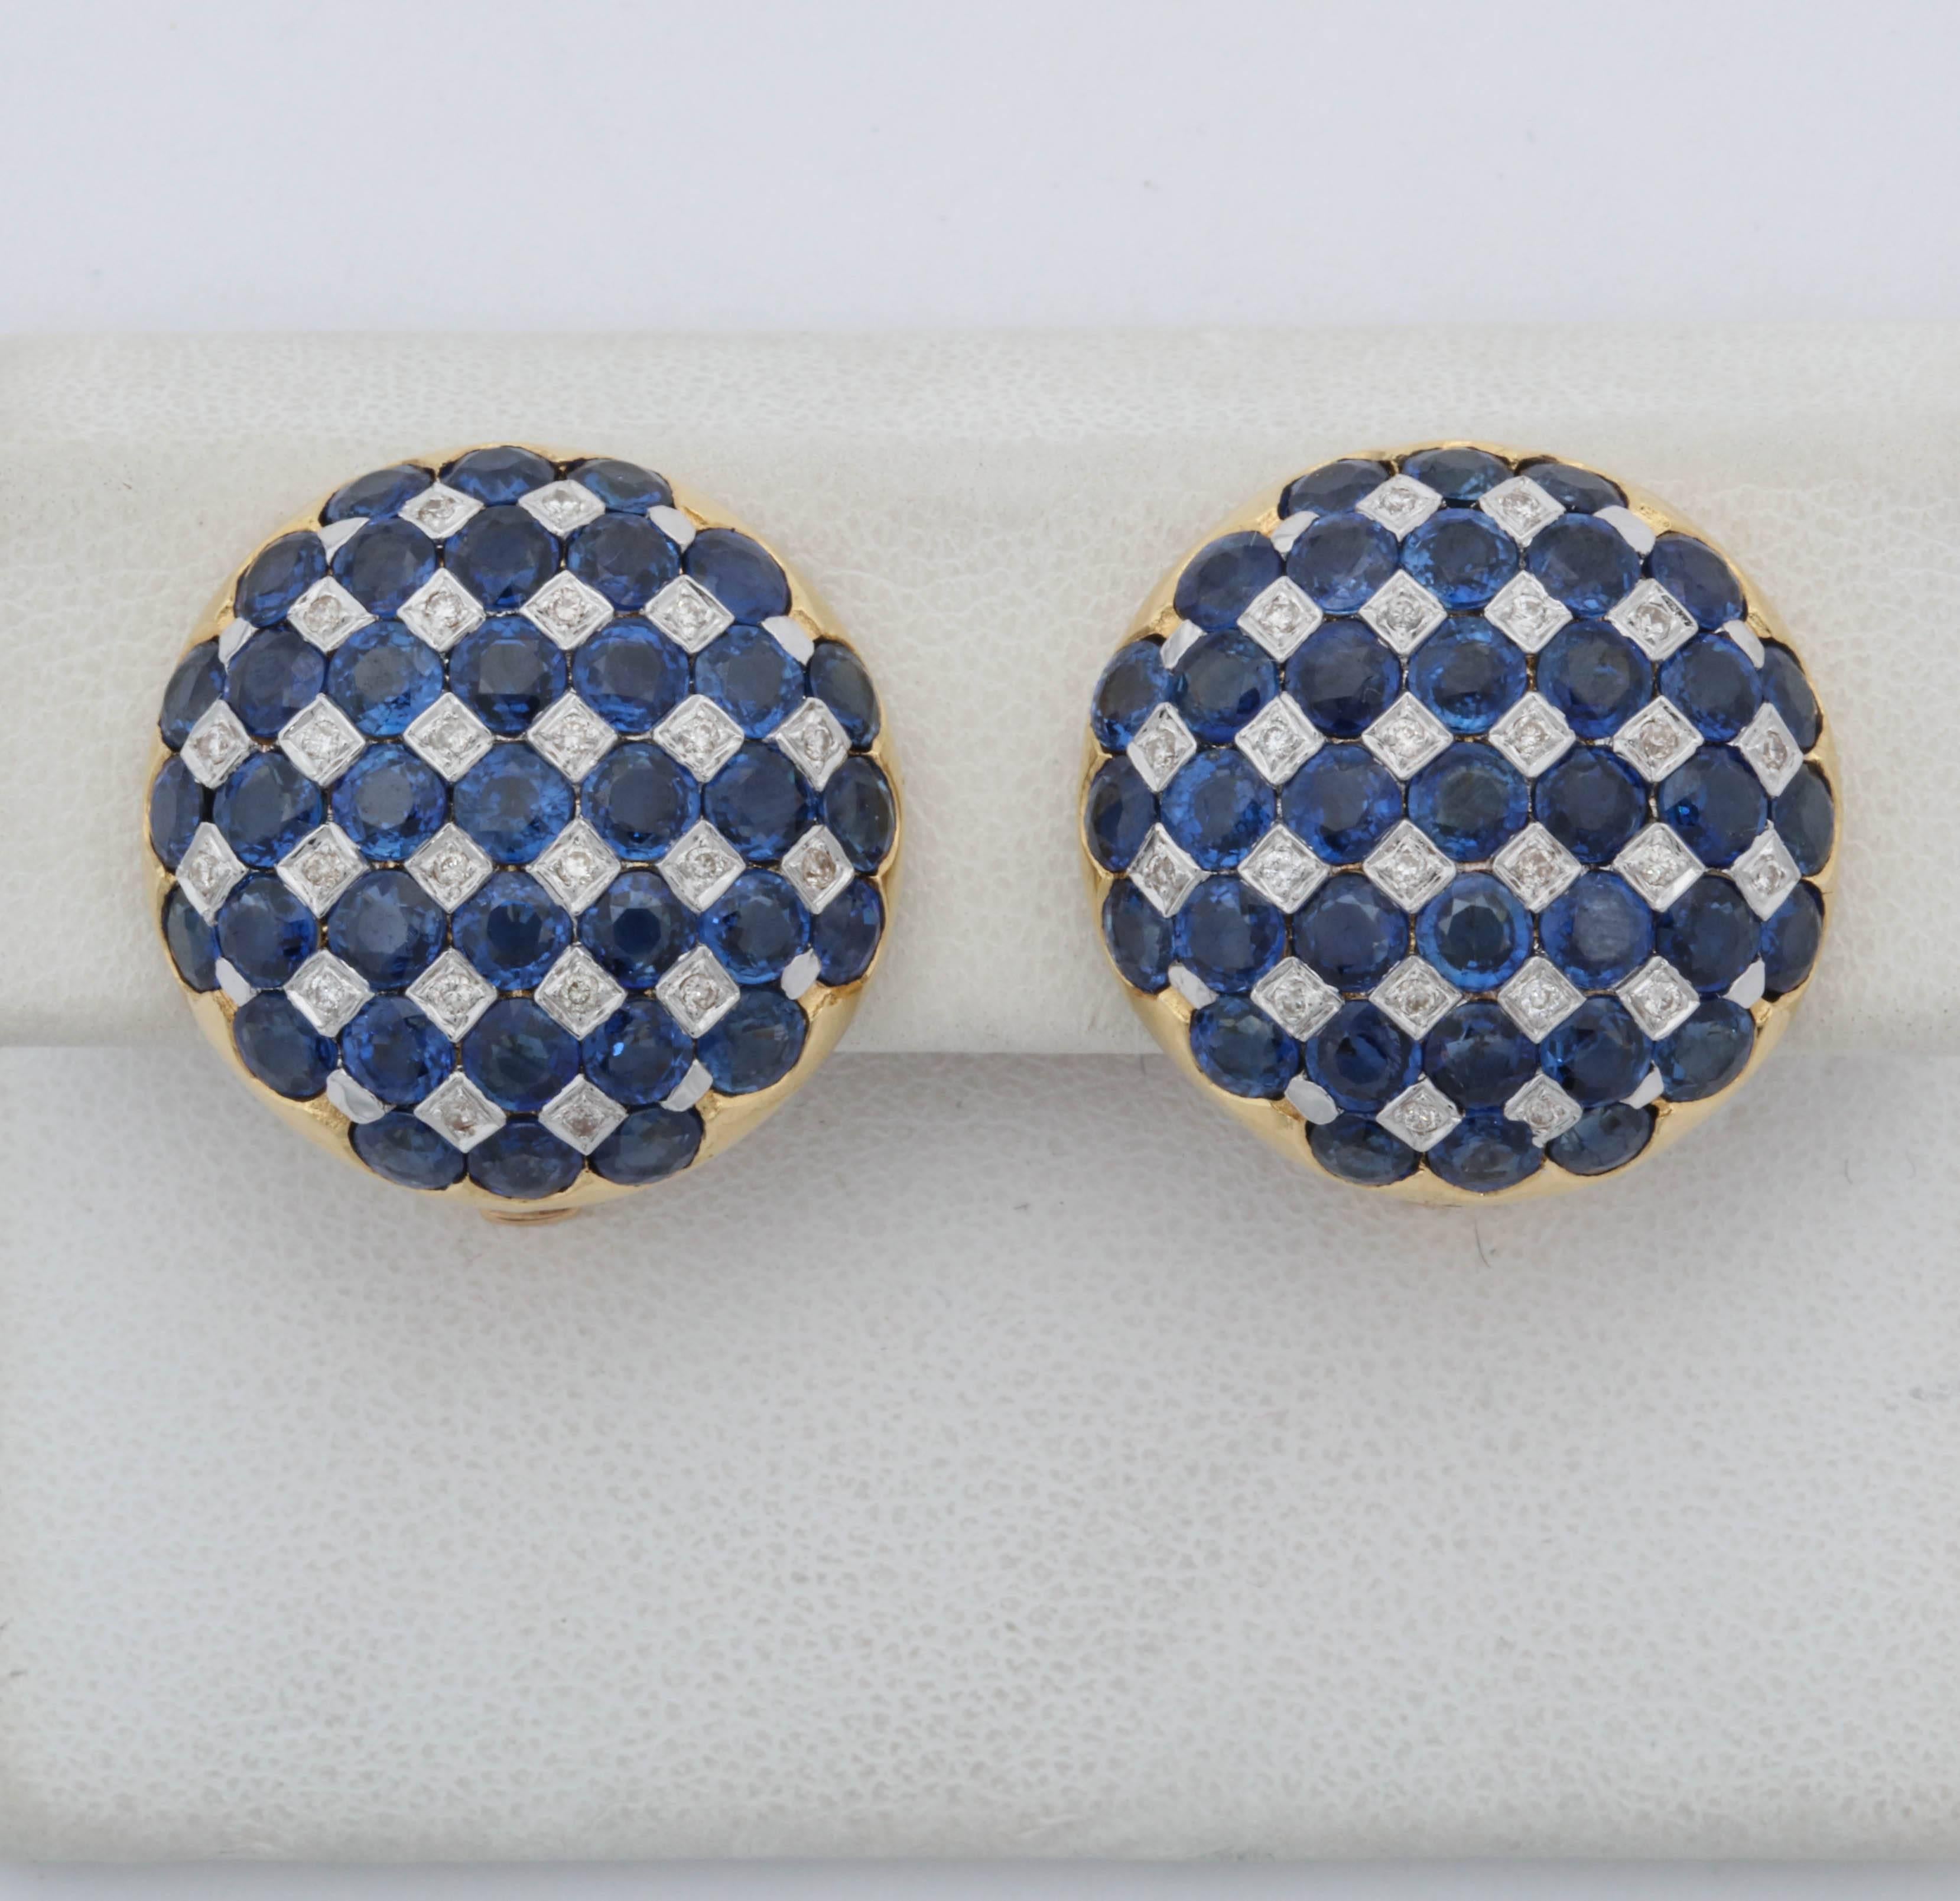 One Pair Of Ladies 18kt Gold And Numbered With a Fine Quality Jewelers serial # Designed In A Round Checkerboard Patter Of Beautiful Color Sapphires Centering Numerous full Cut Diamonds. Total sapphire Weight approximately 5 Carats , Total Diamond